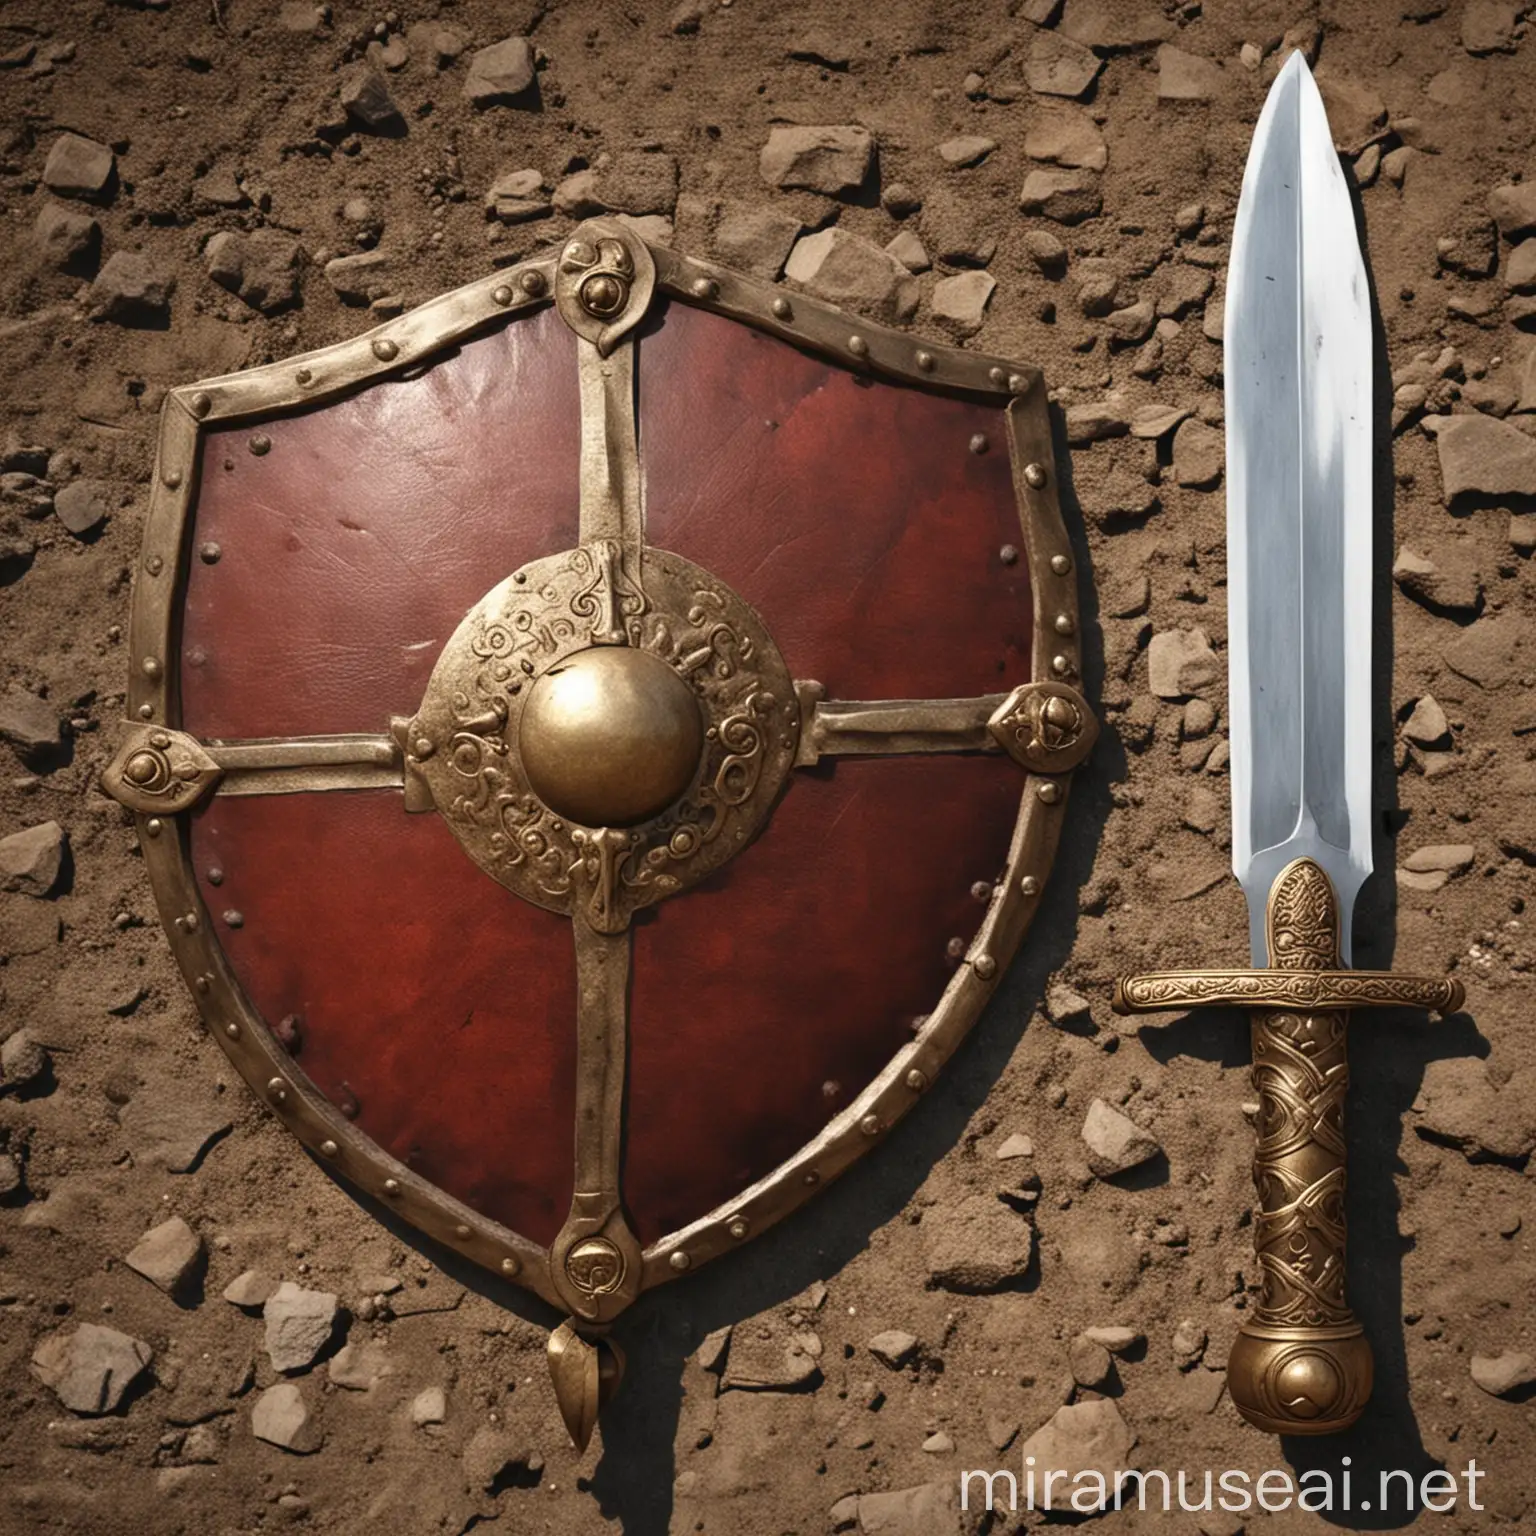 create a roman gladiator shield with a sword next to it
